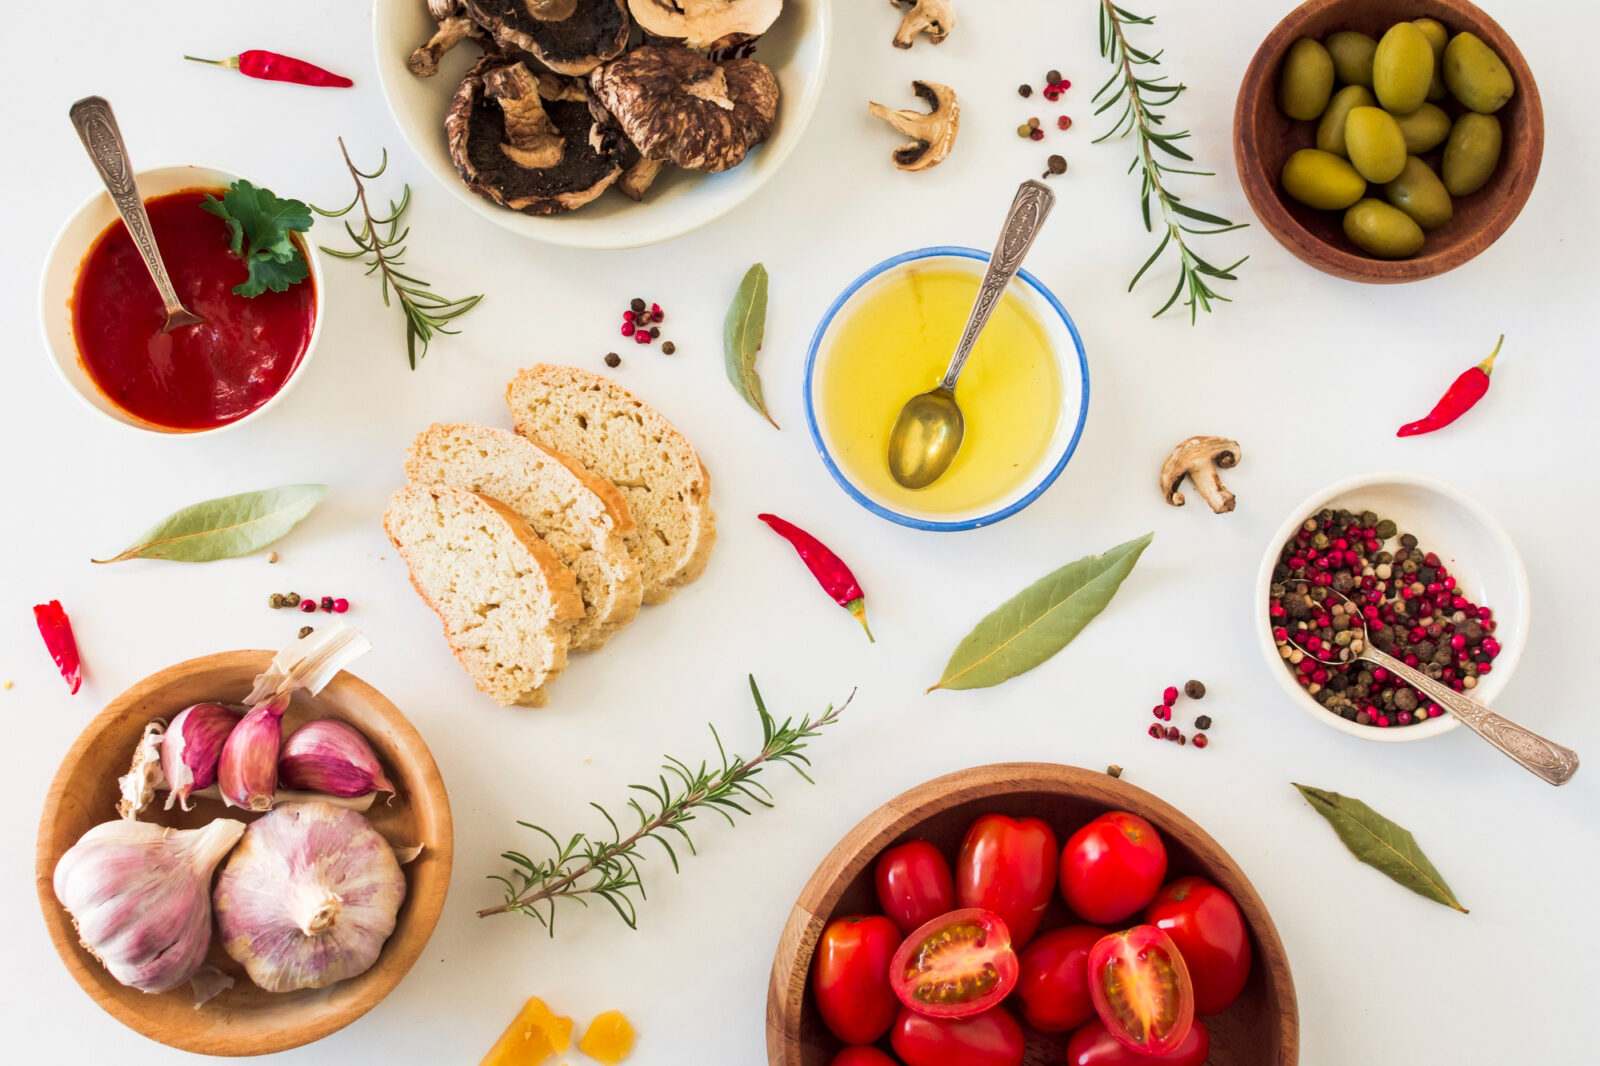 Mediterranean diet foods and ingredients placed on a white table